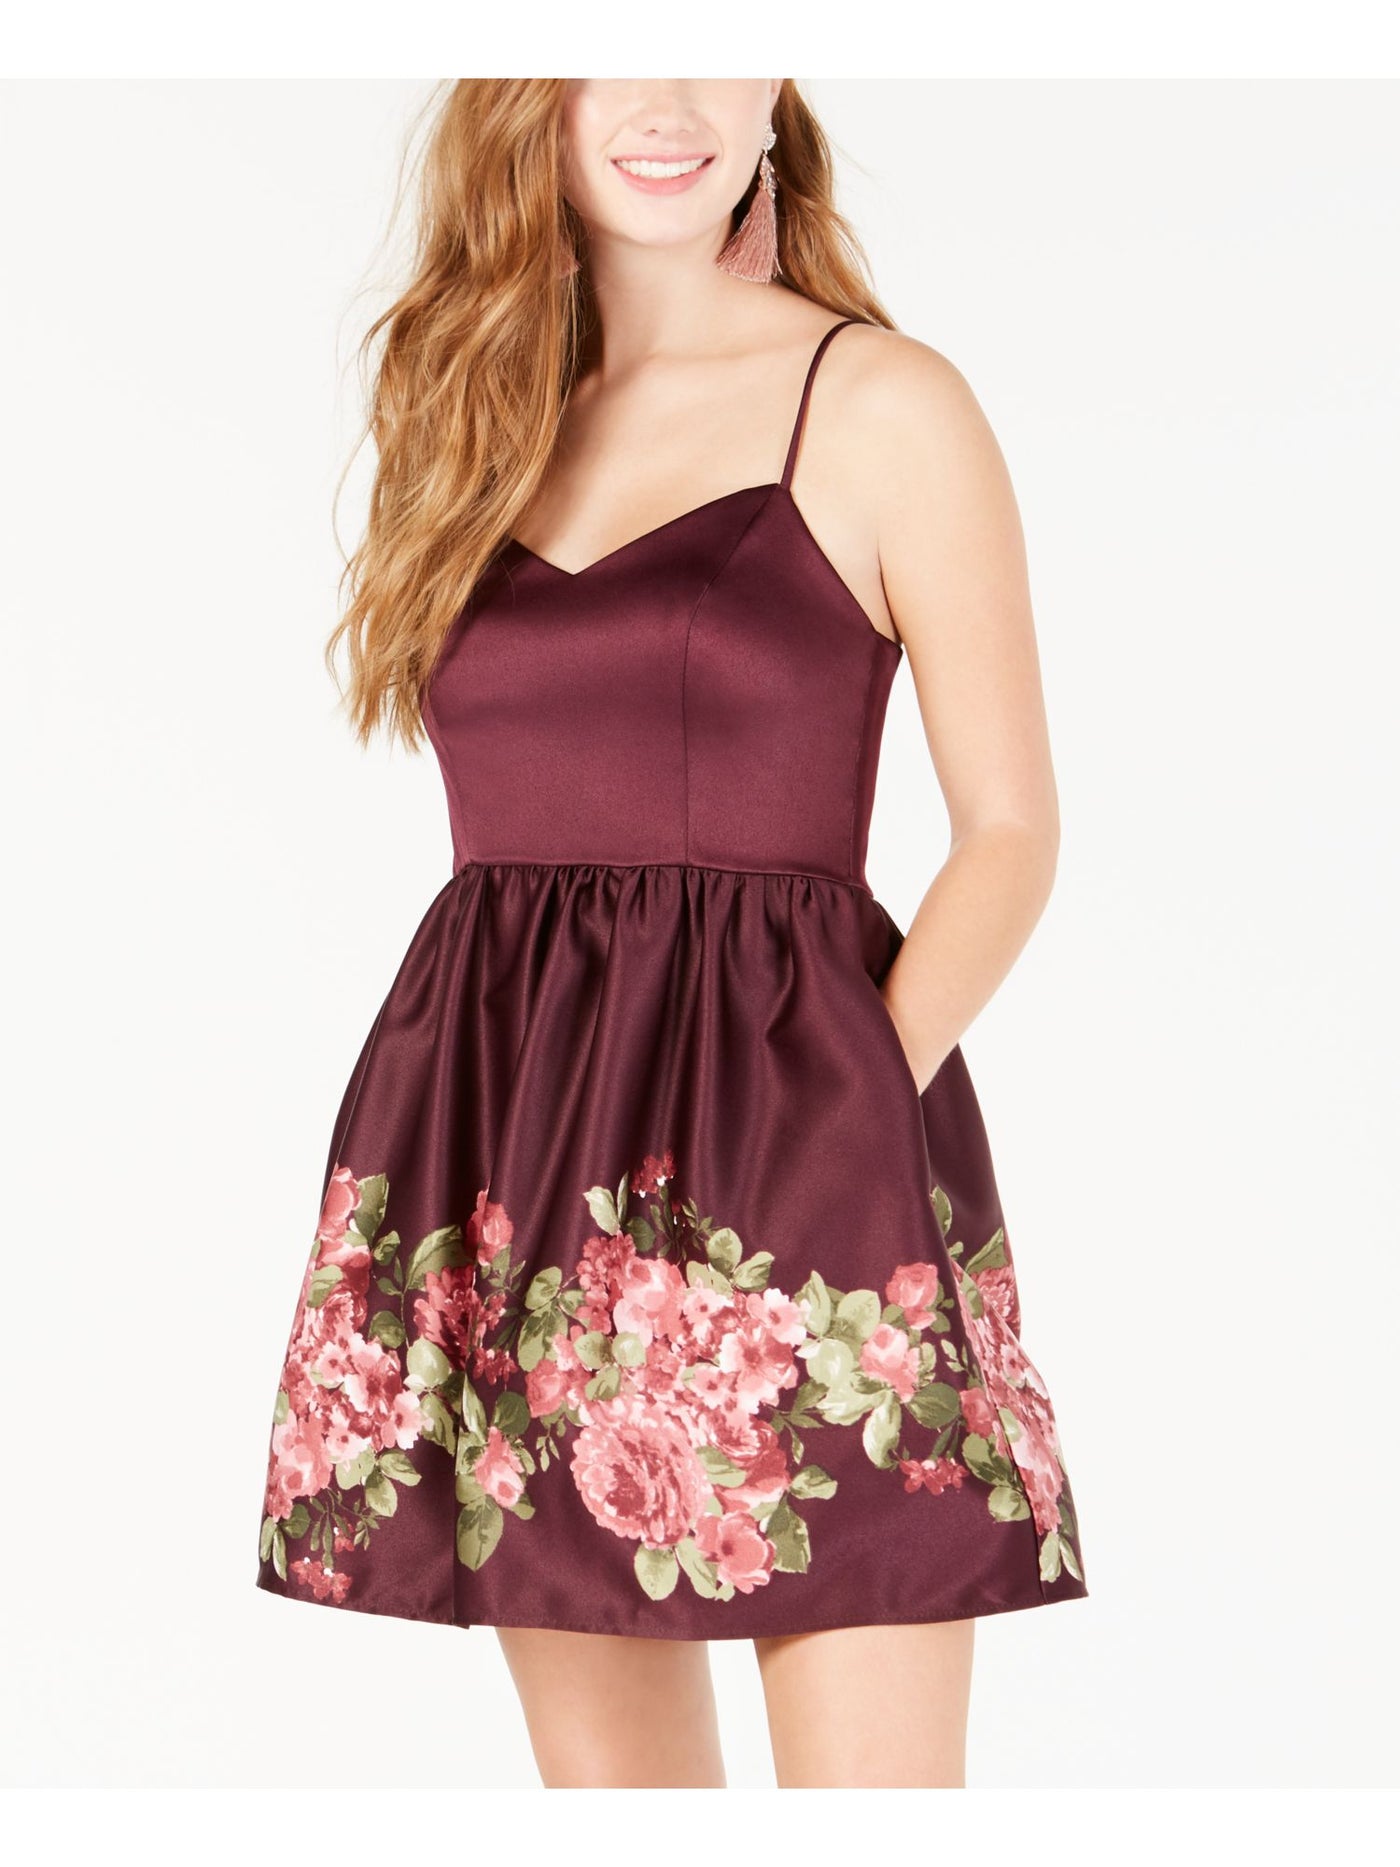 TEEZE ME Womens Burgundy Floral Spaghetti Strap Sweetheart Neckline Mini Party Fit + Flare Dress Juniors 0